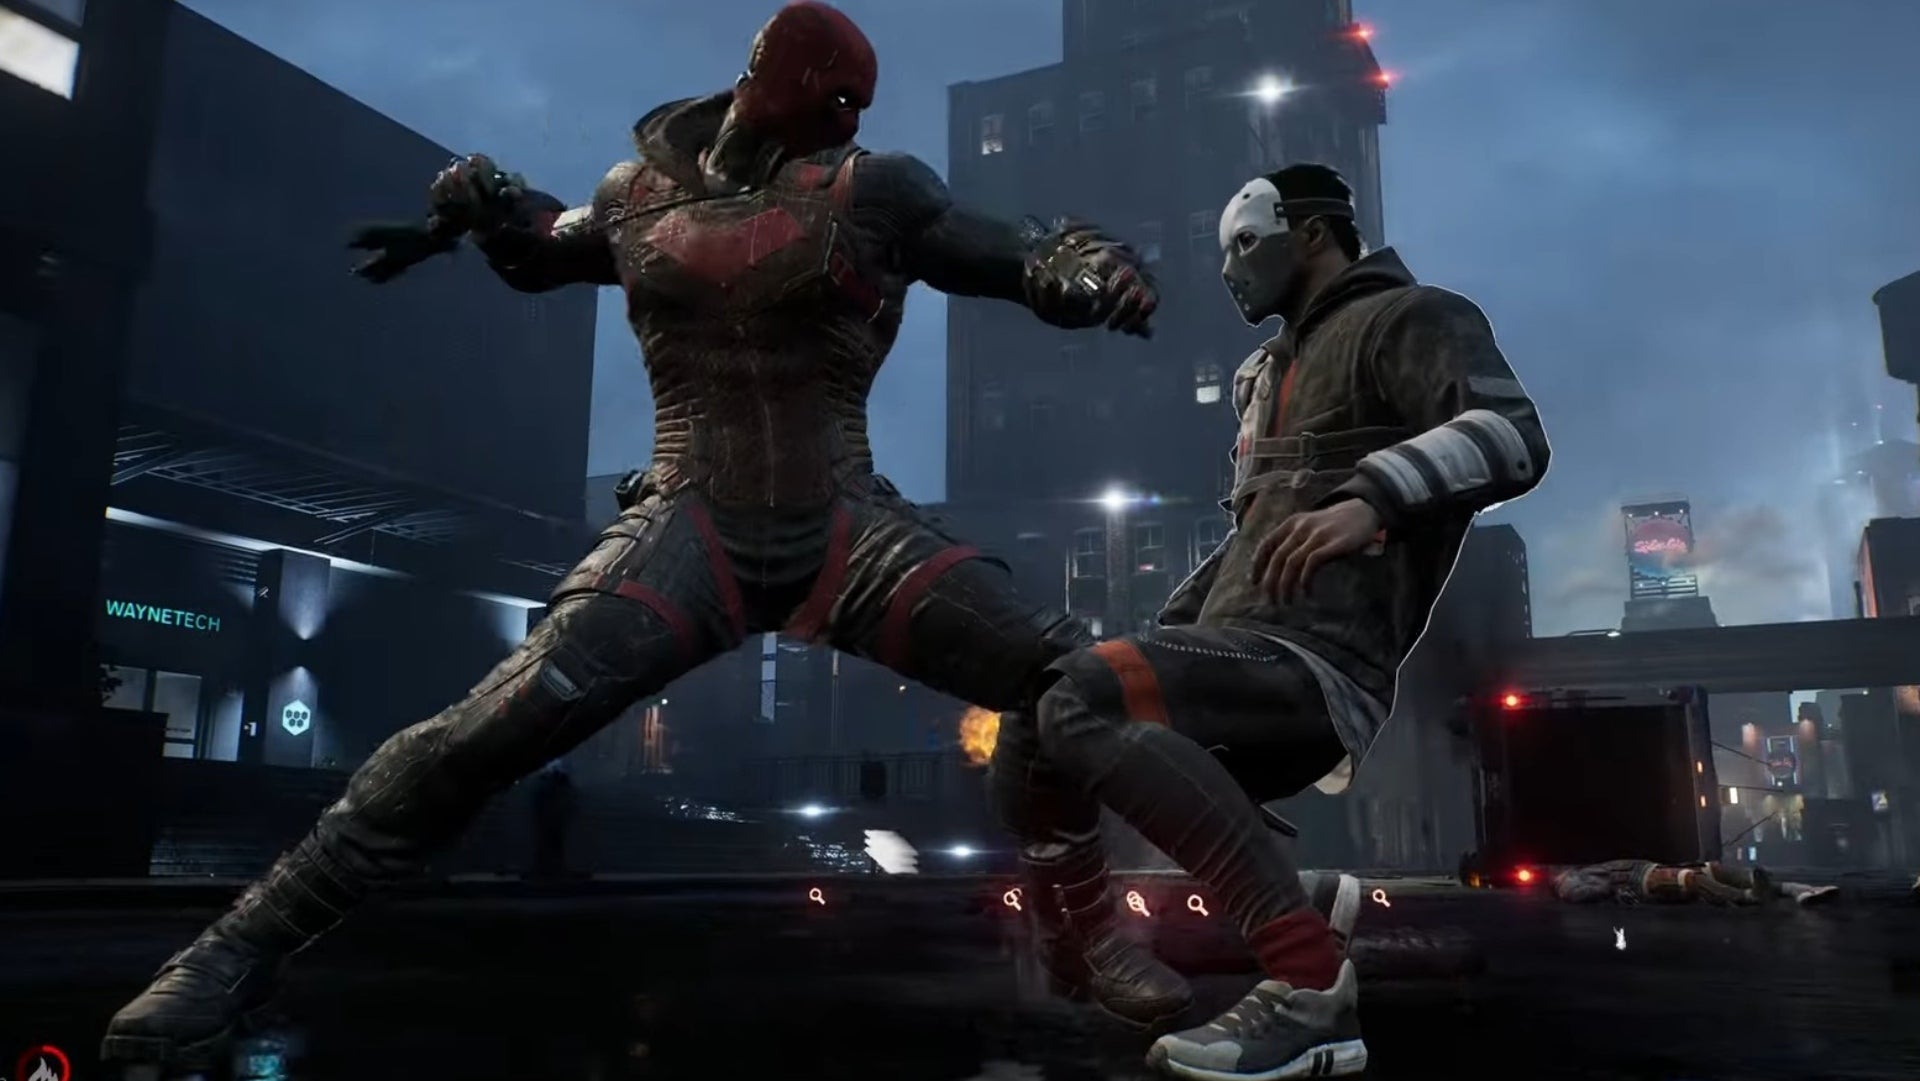 GOTHAM KNIGHTS gameplay demo shows off Nightwing and Red Hood combat